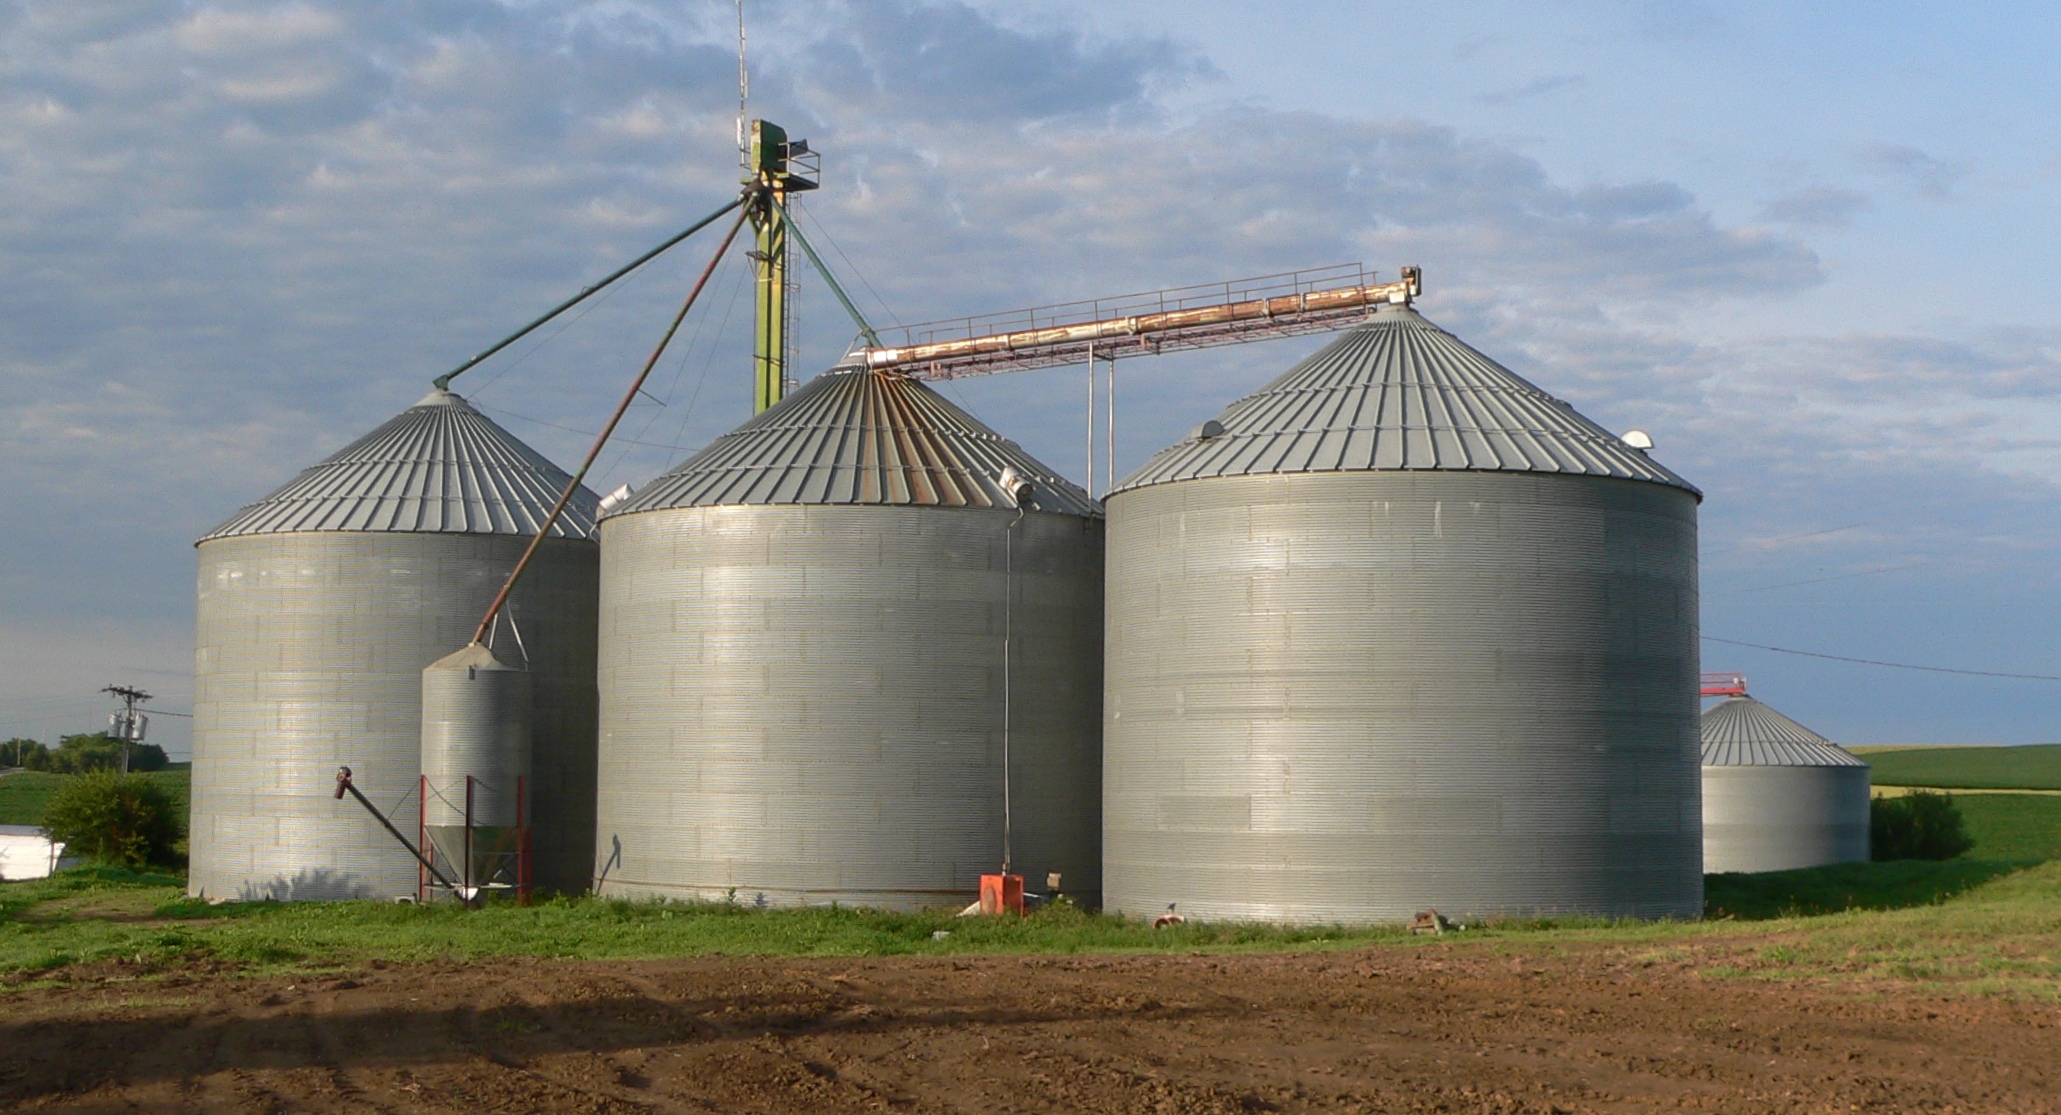 Apartments: Stainless Steel Grain Silo Homes For Industrial